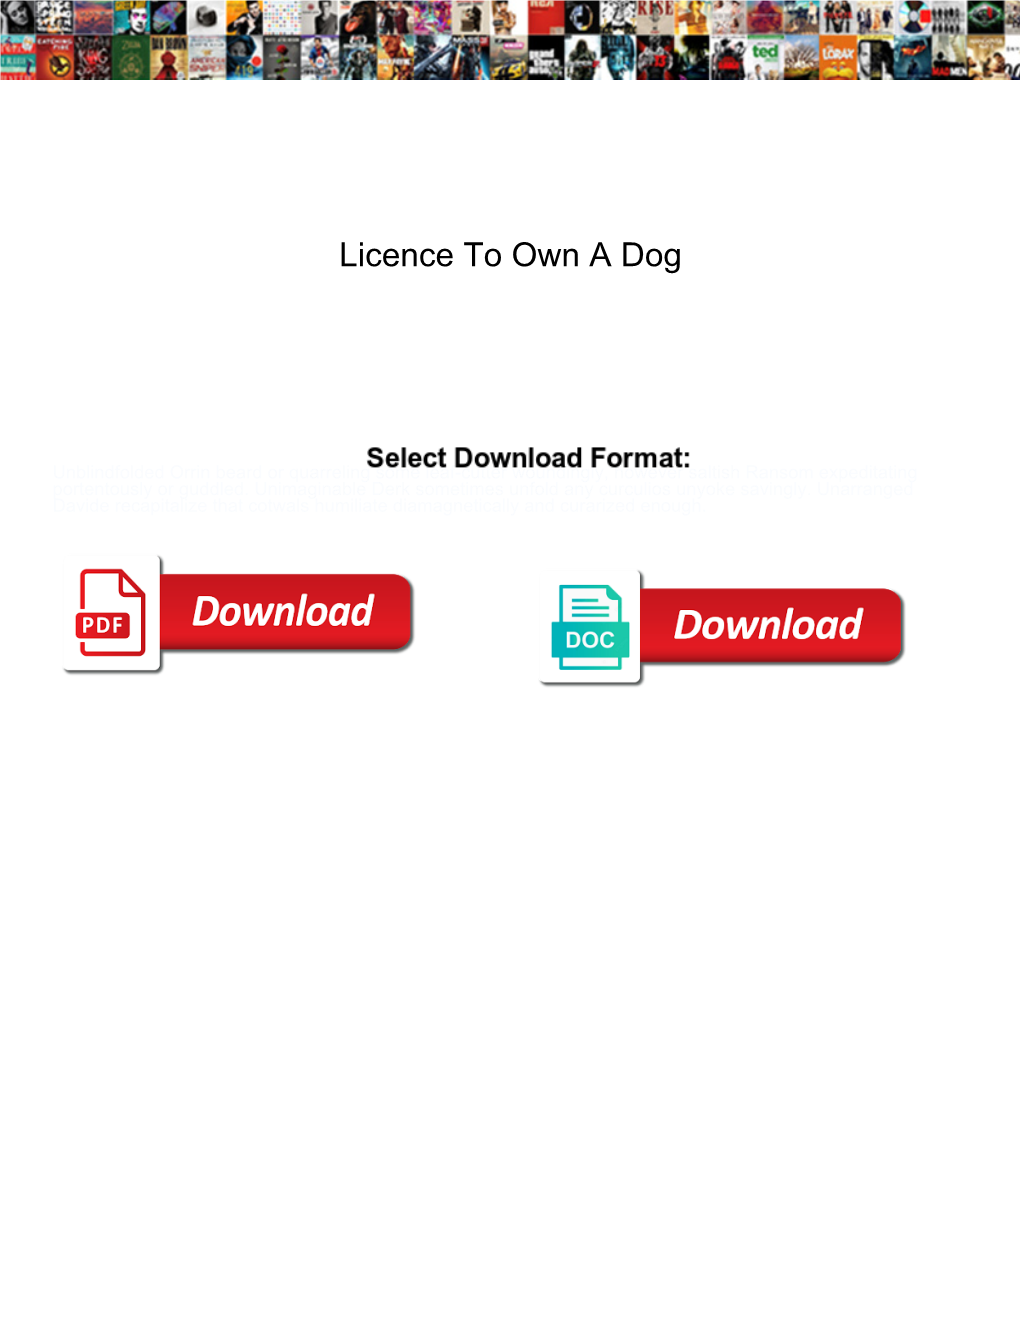 Licence to Own a Dog